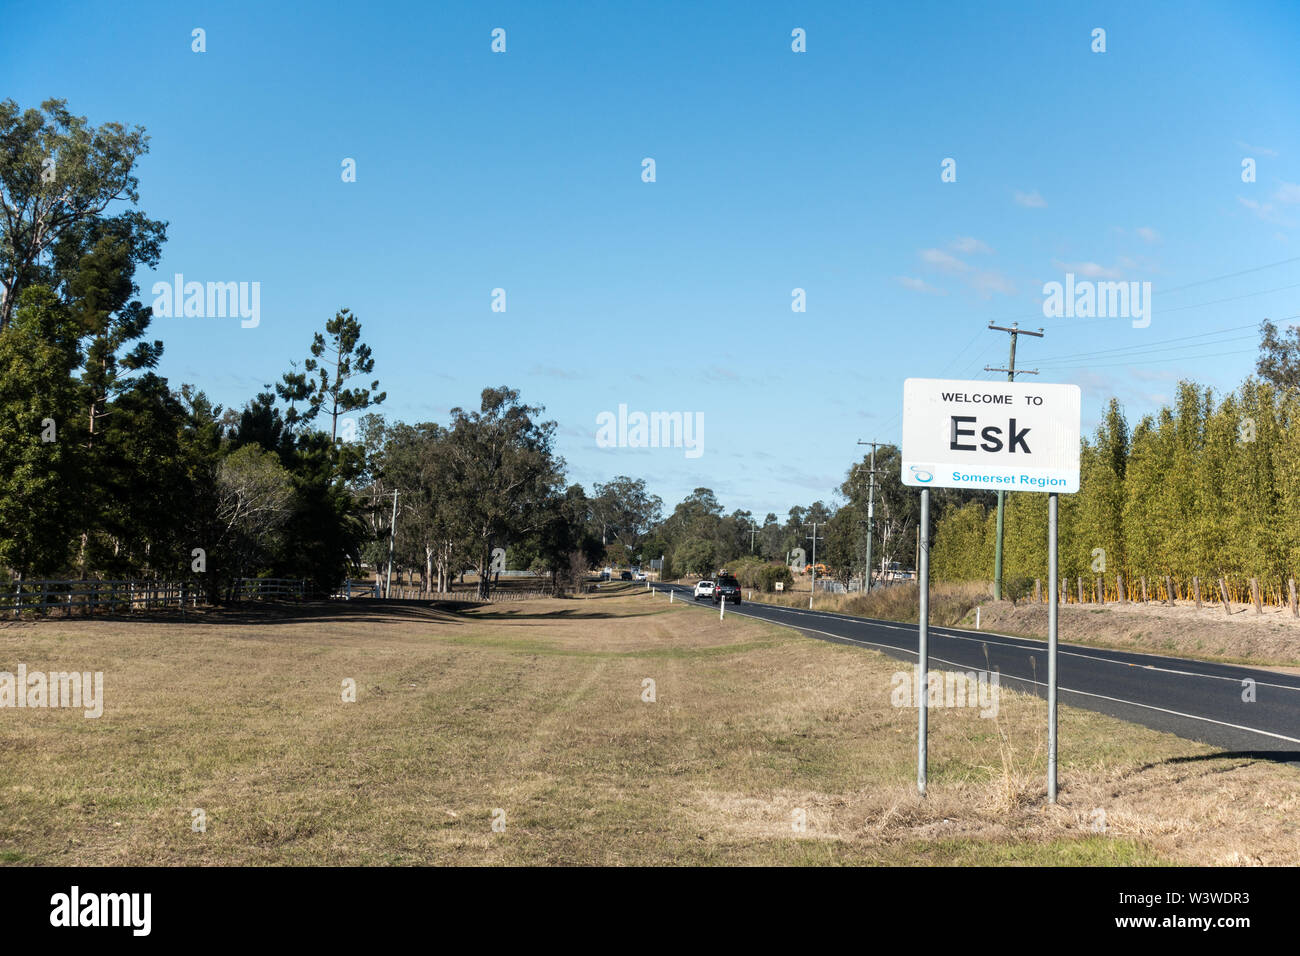 Town sign, Welcome to Esk. Somerset Region of SE Queensland Australia. Stock Photo